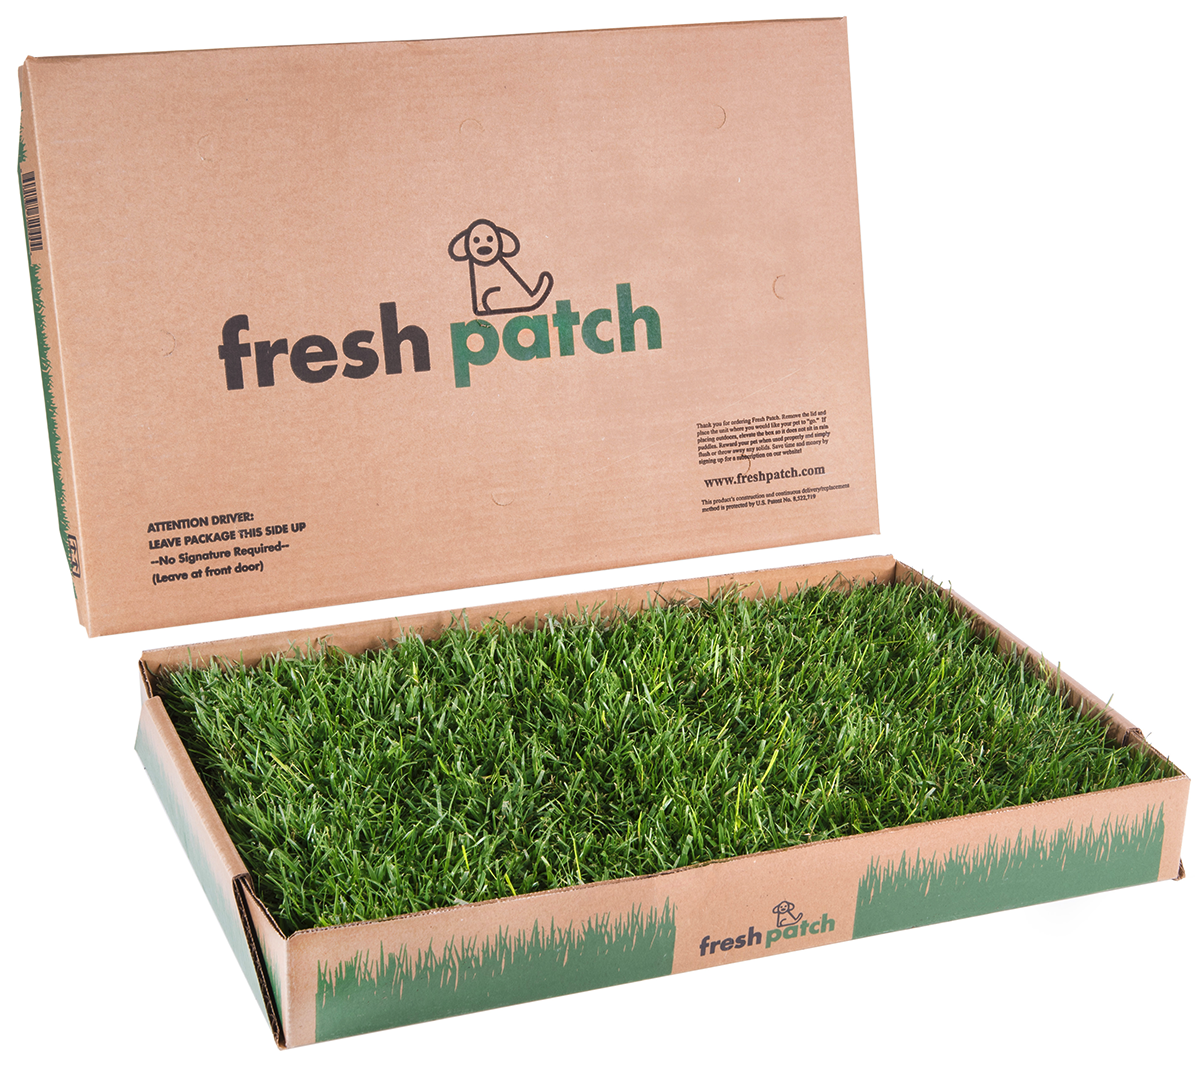 Image of Fresh Patch grass box